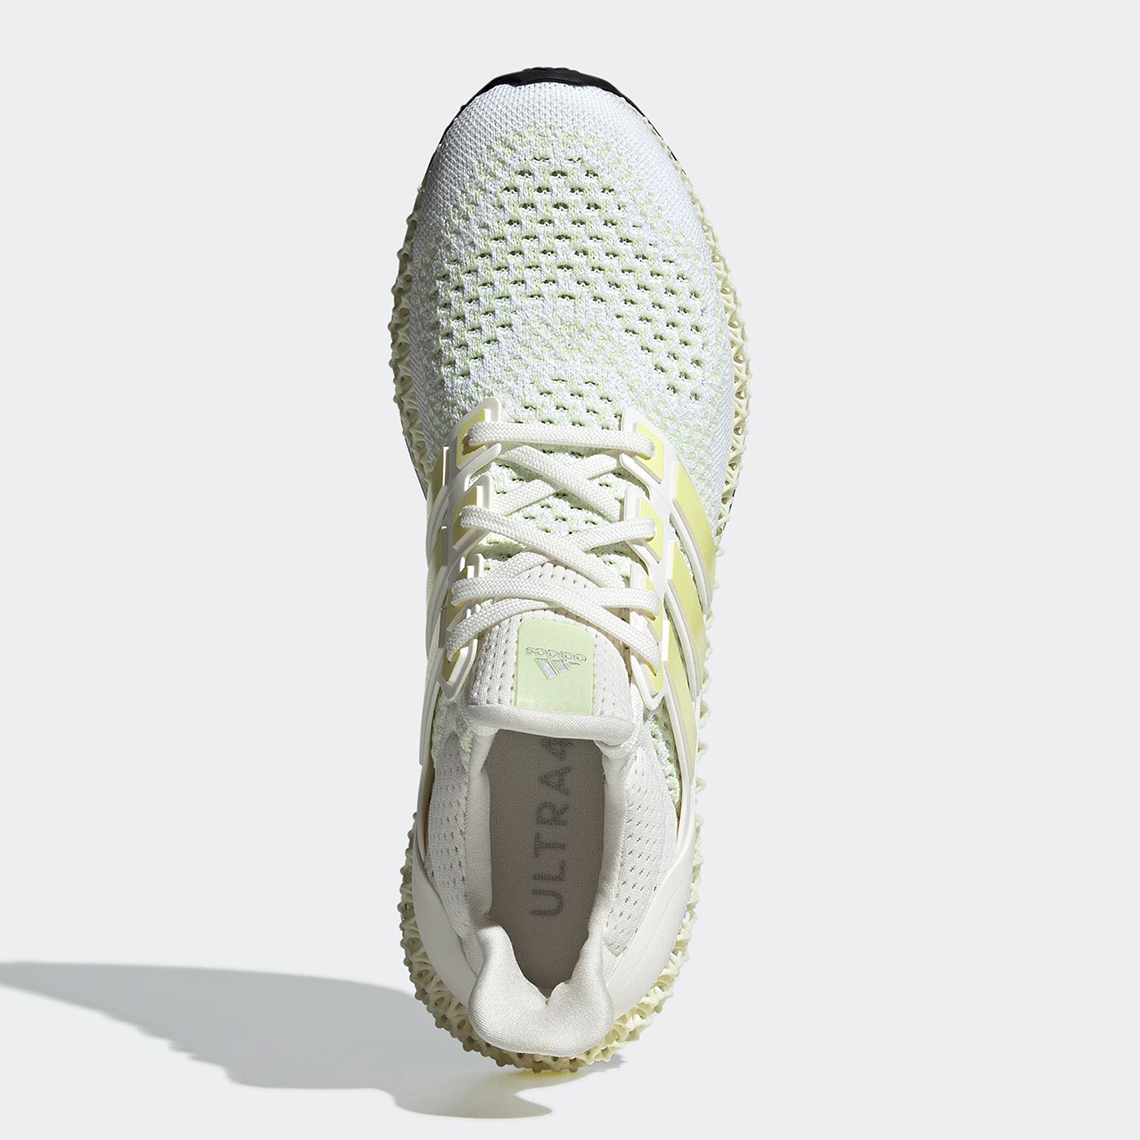 Adidas Ultra 4d White Yellow Gx6366 Release Date 7